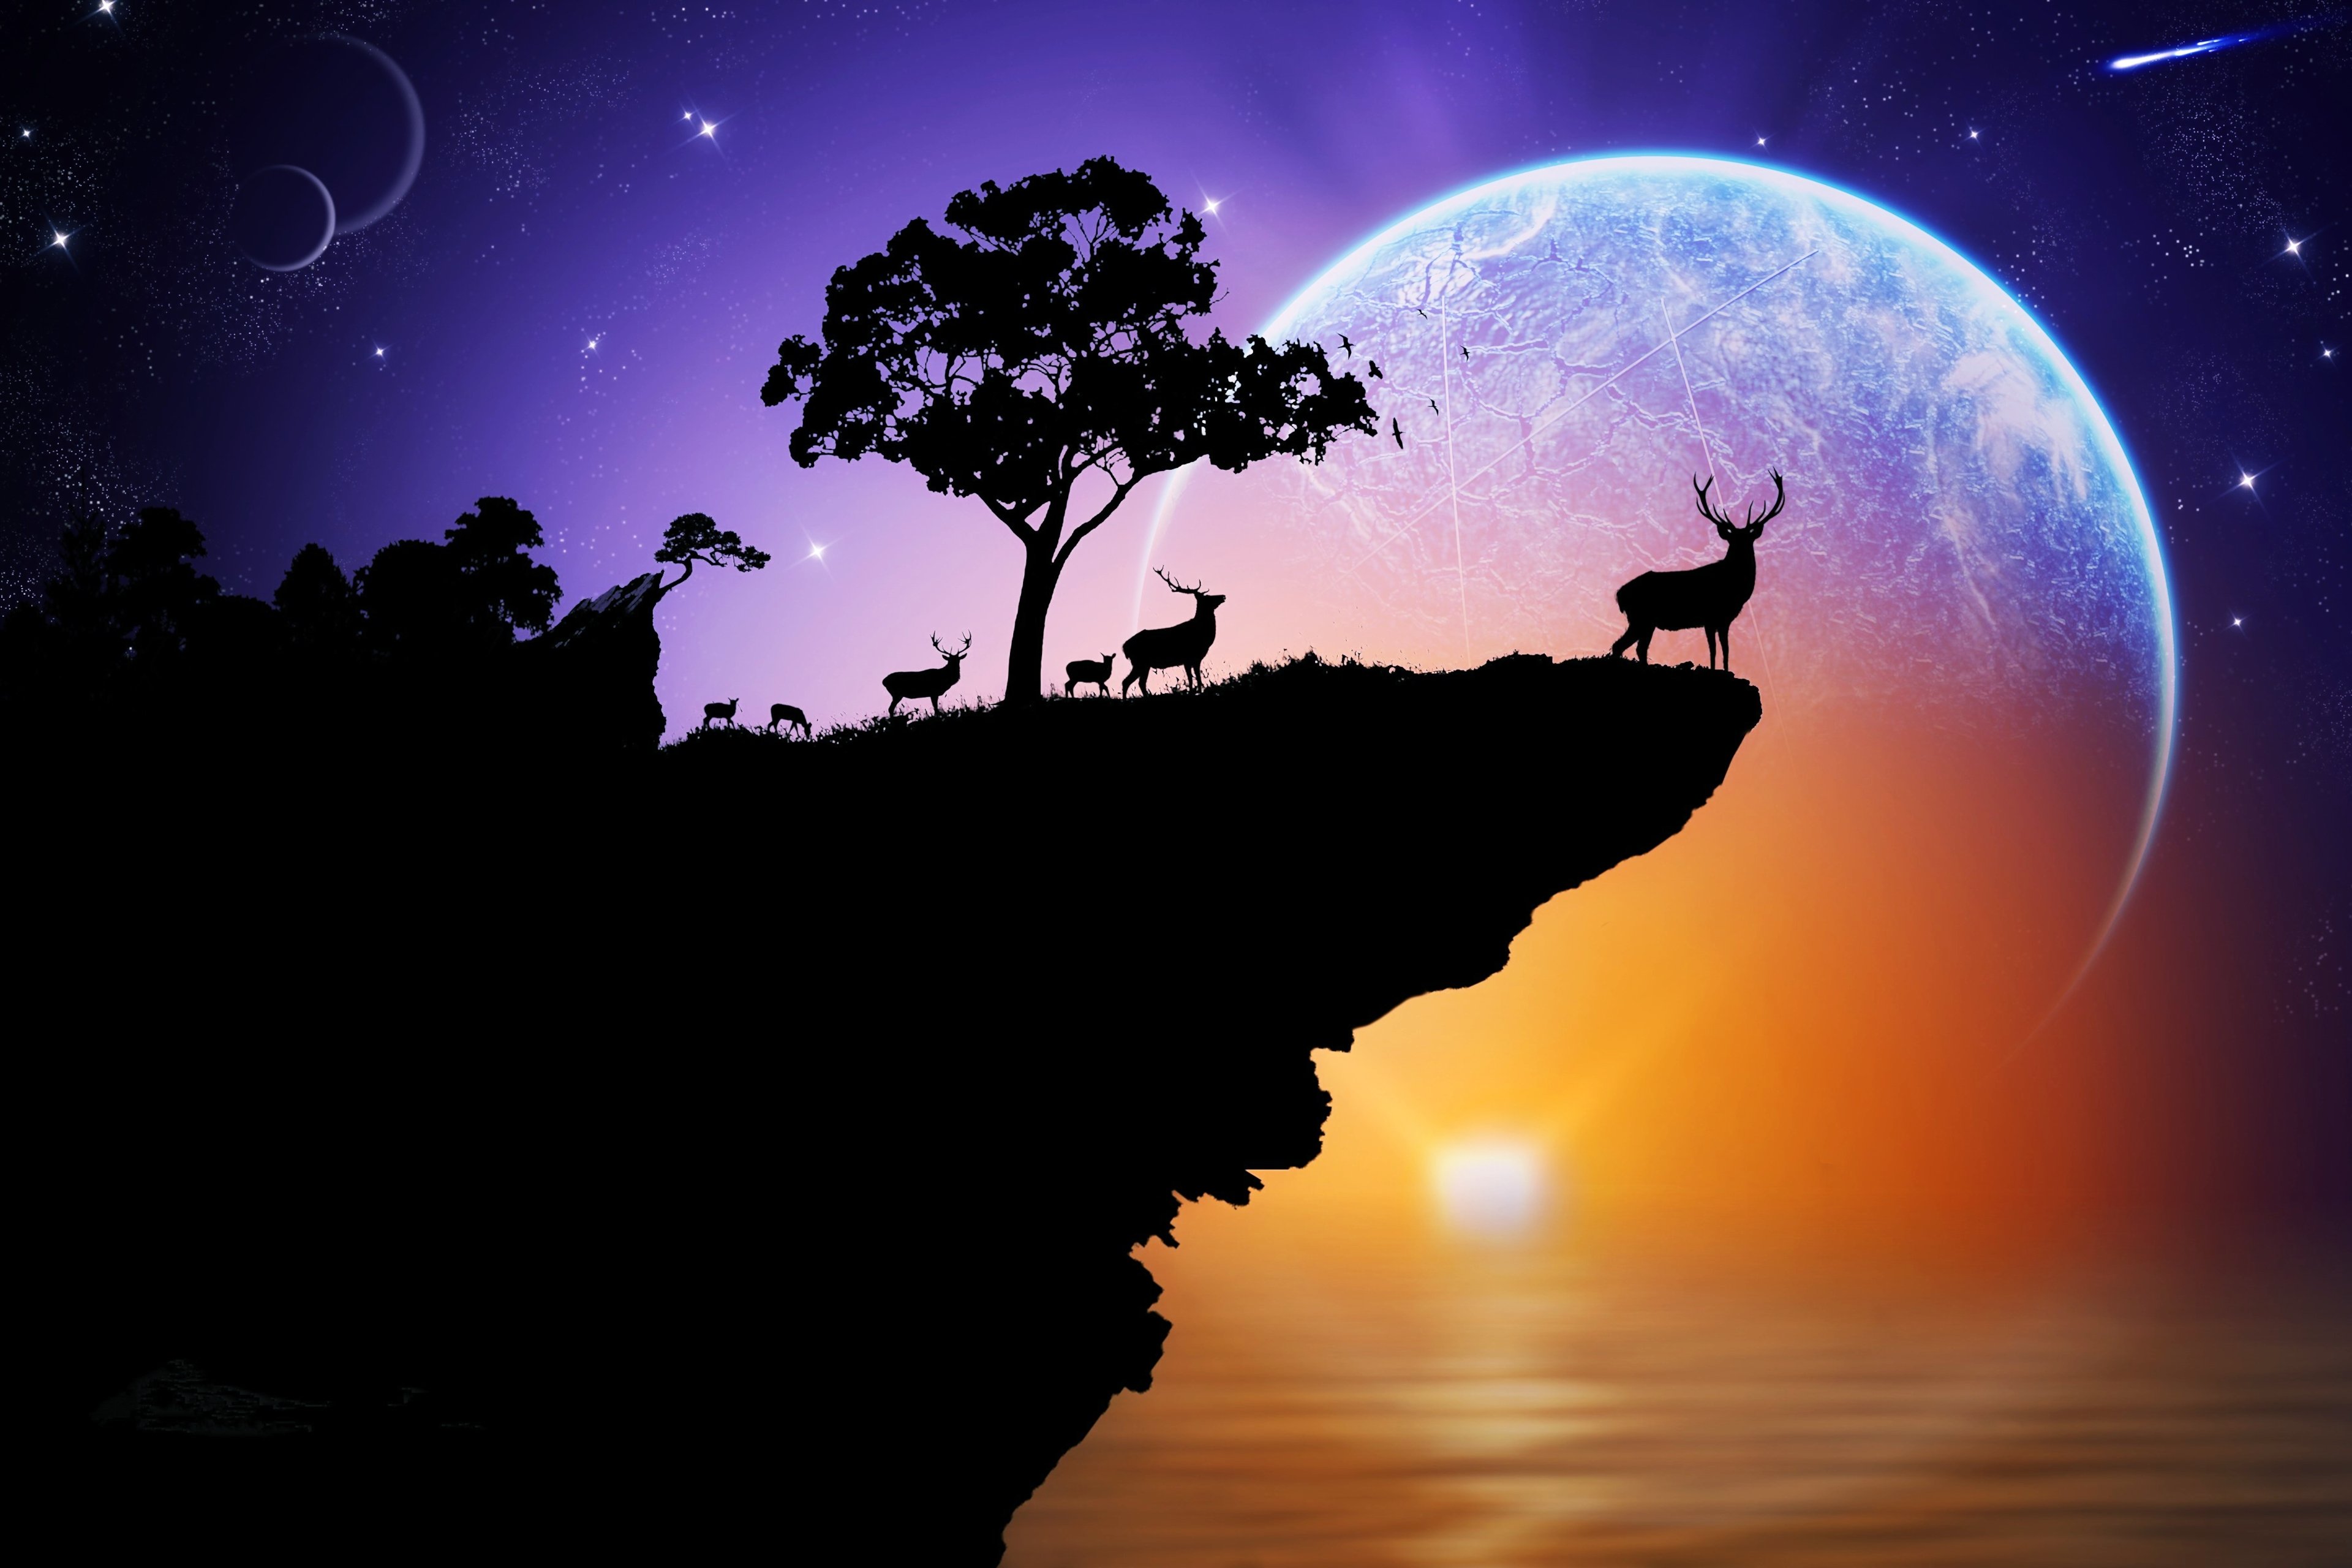 space, Fantasy, Animals, Landscapes, Planets, Sunset, Beauty, Imaginations, Stars Wallpaper